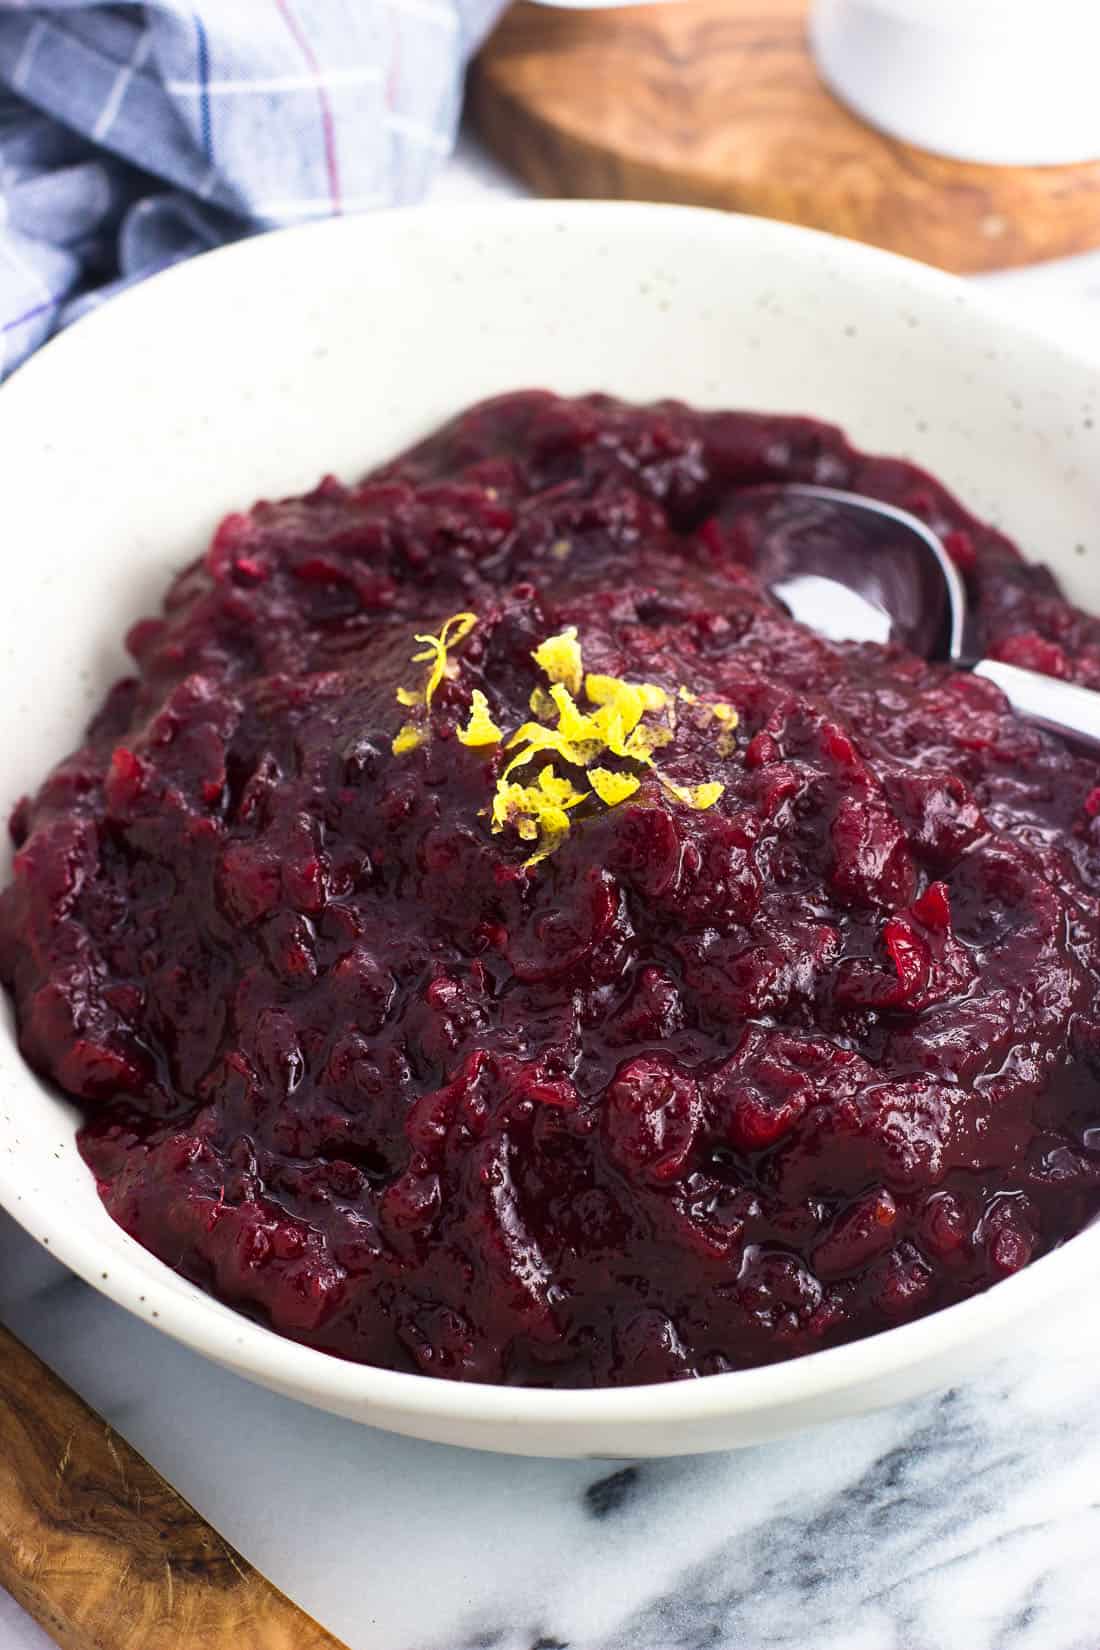 Cranberry sauce in a serving dish with a spoon topped with citrus zest